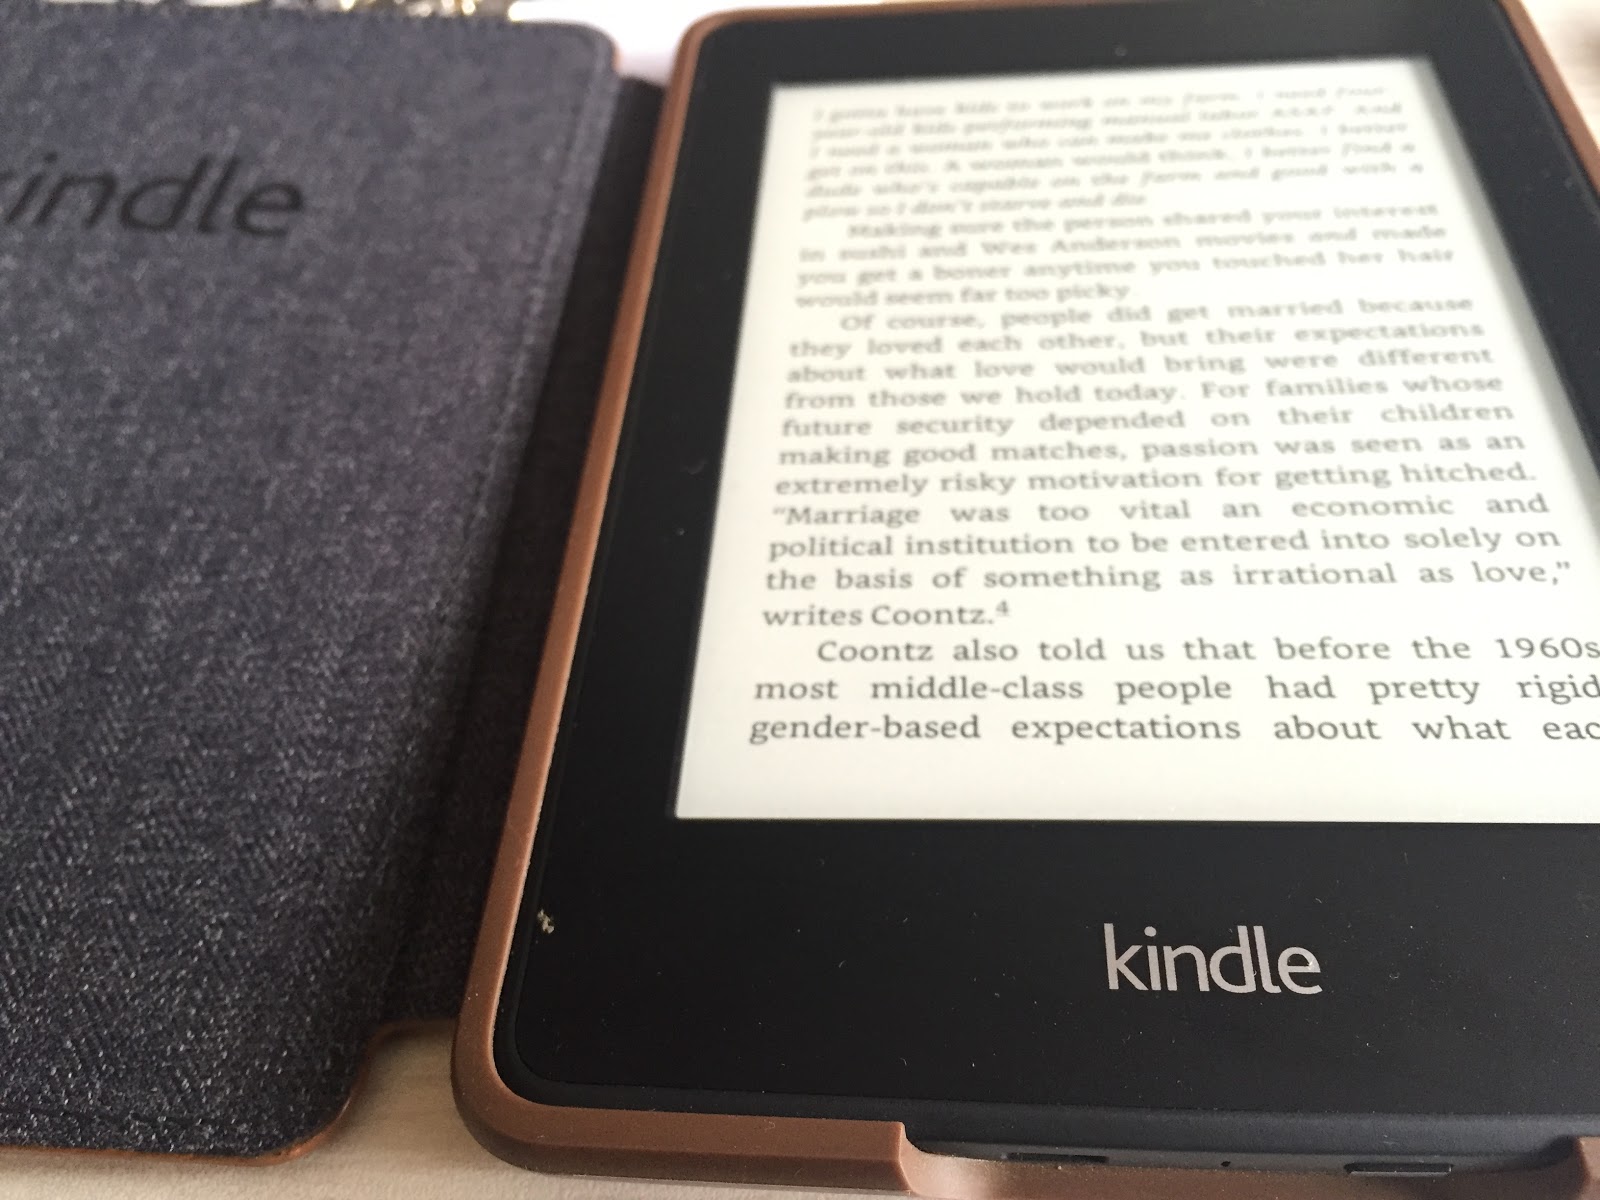 Which is better for your eyes: e-readers or print